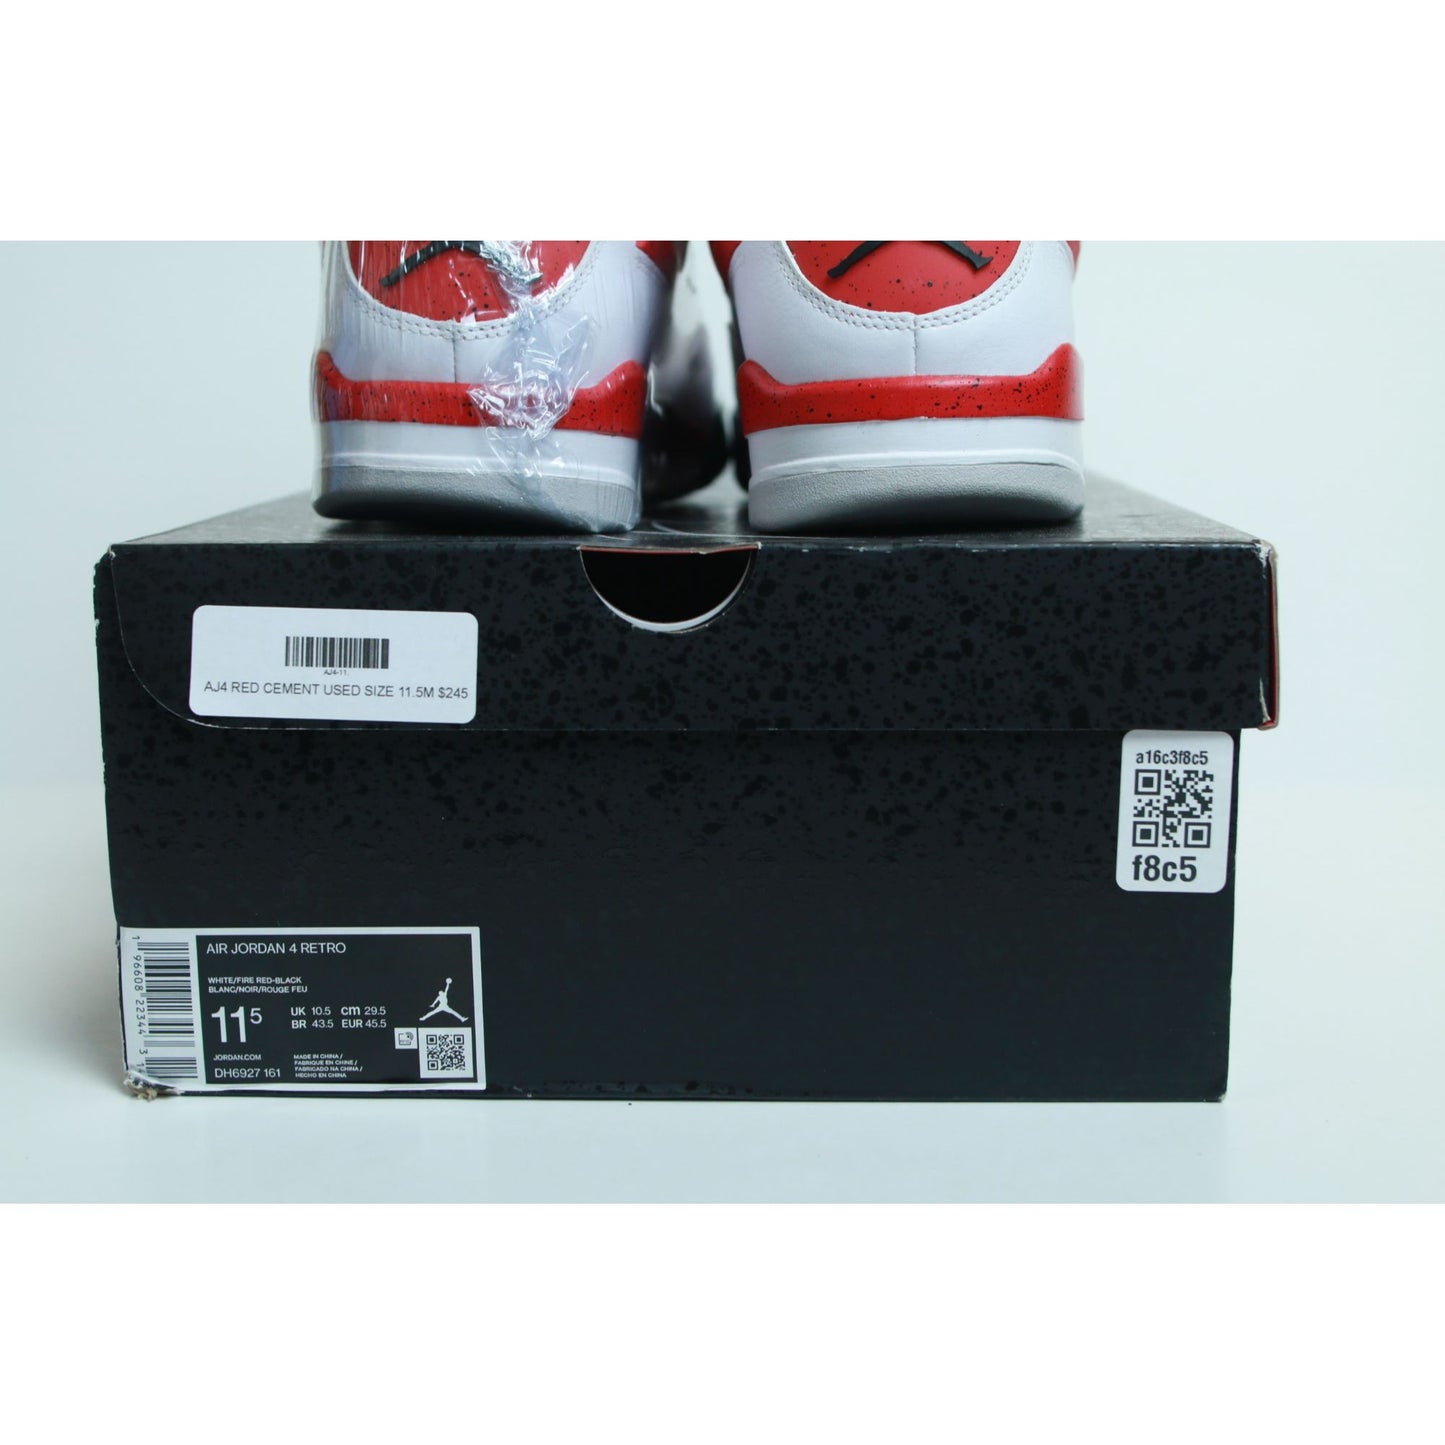 AJ4 RED CEMENT USED SIZE 11.5M